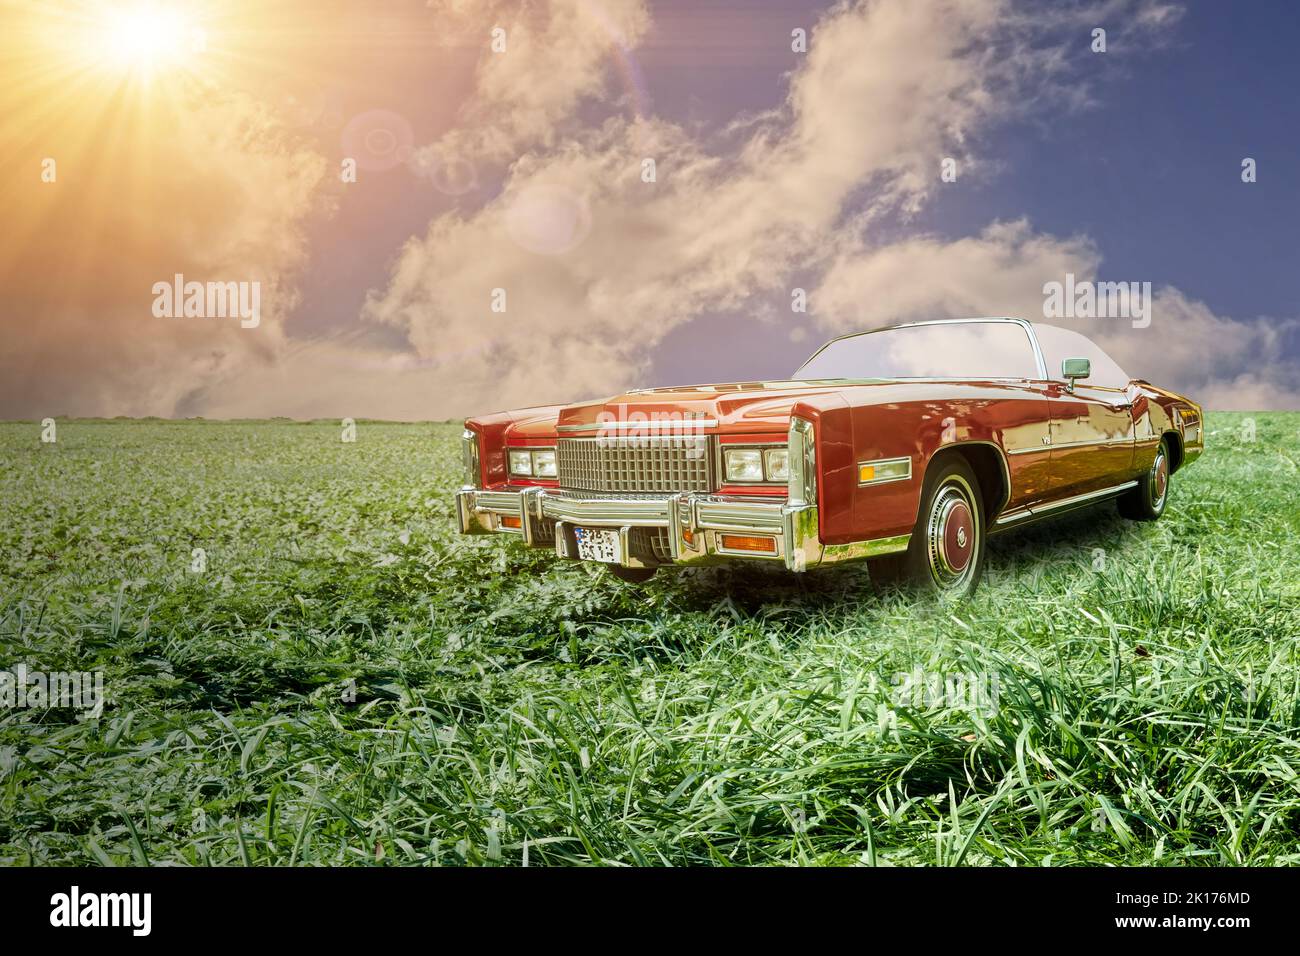 Cadillac convertible, classic road cruiser of American production, on a meadow in front of cloudy sky with sun rays, Vehicle location Lehnin, Germany, Stock Photo